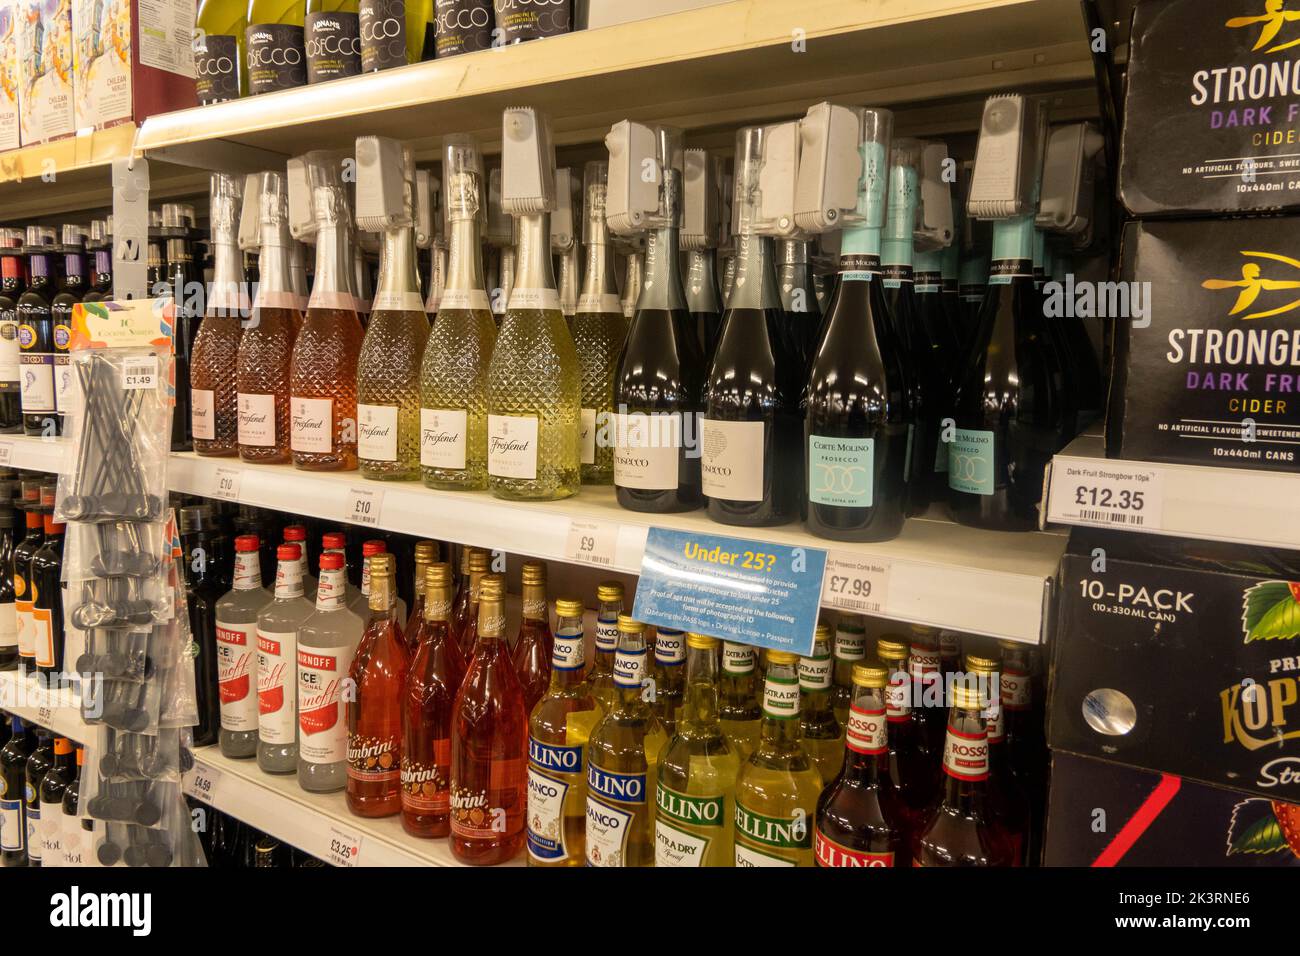 Bottles of wine and spirit on a shelf in a supermarket with security tags on each bottle to stop shop lifting in the UK Stock Photo